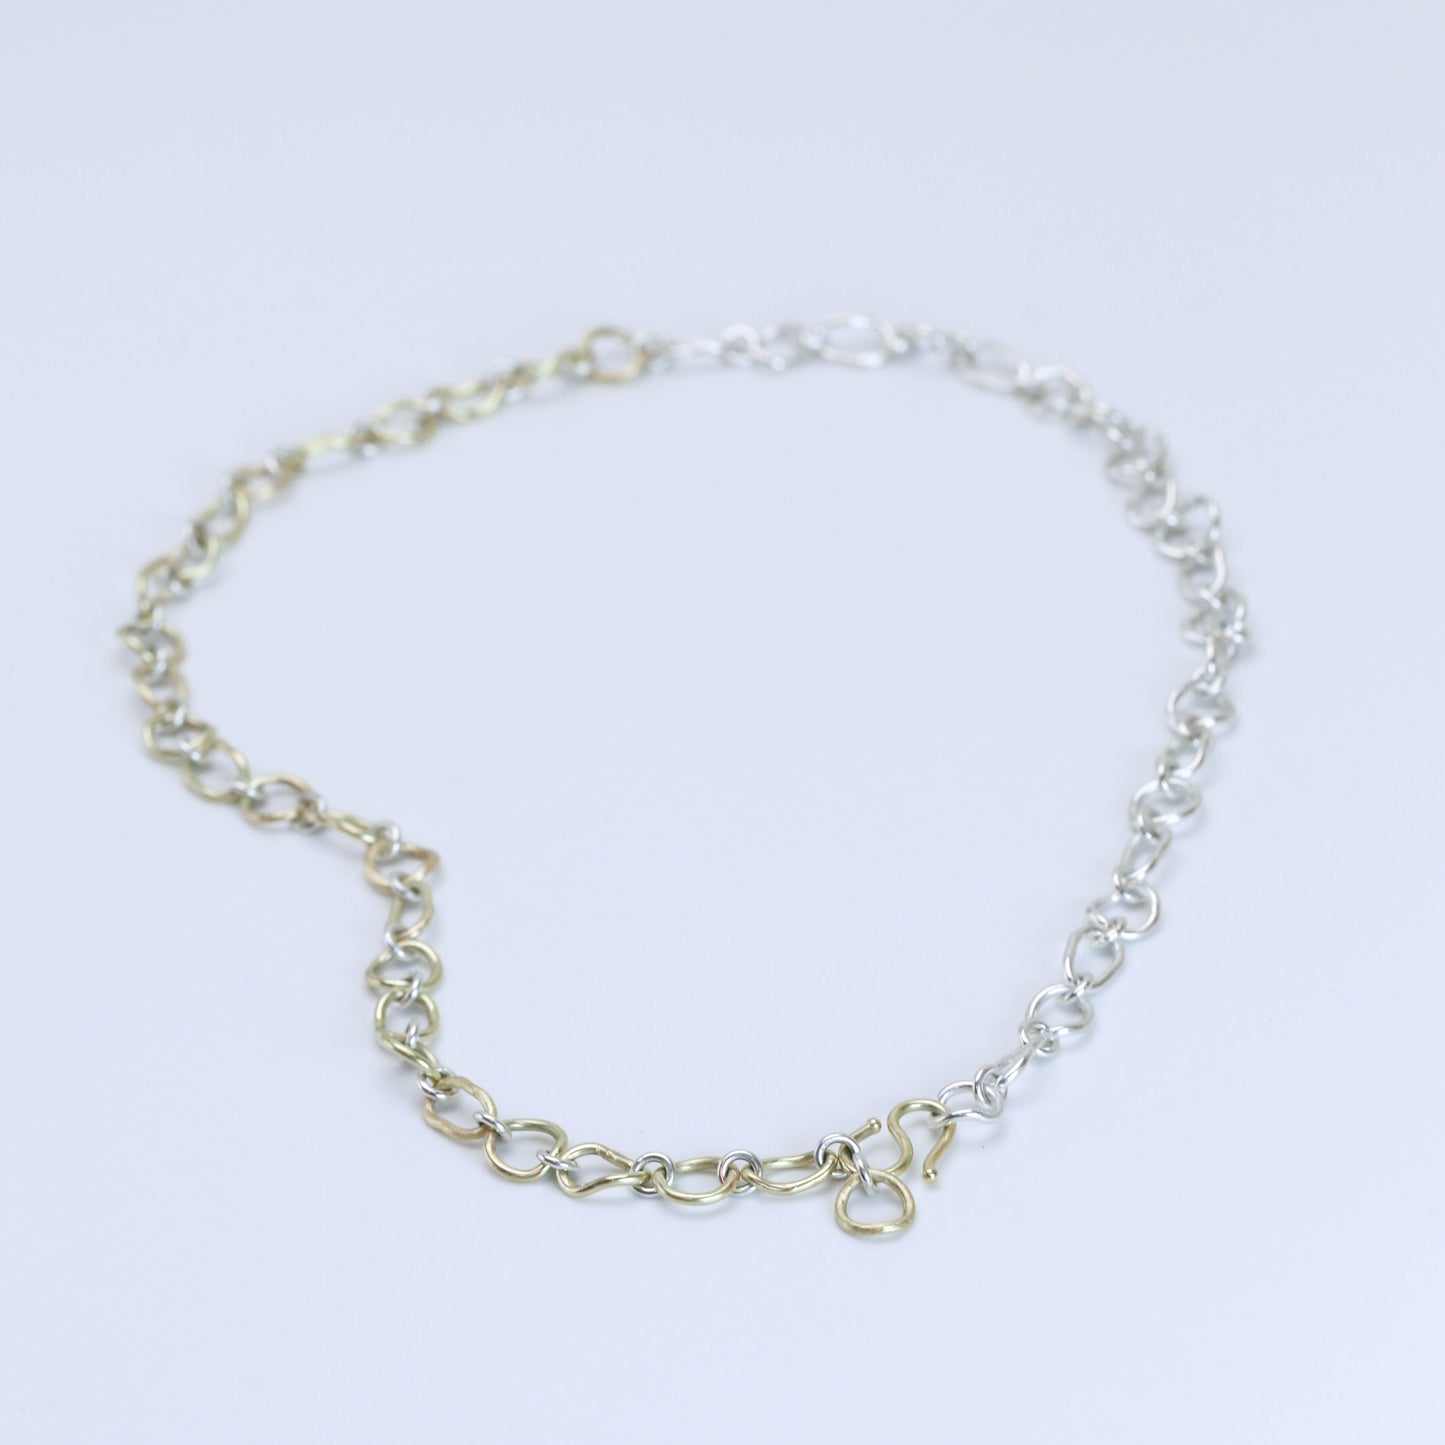 CONTOUR CHAIN - SG 999 & 14K Handcrafted Chain Necklace